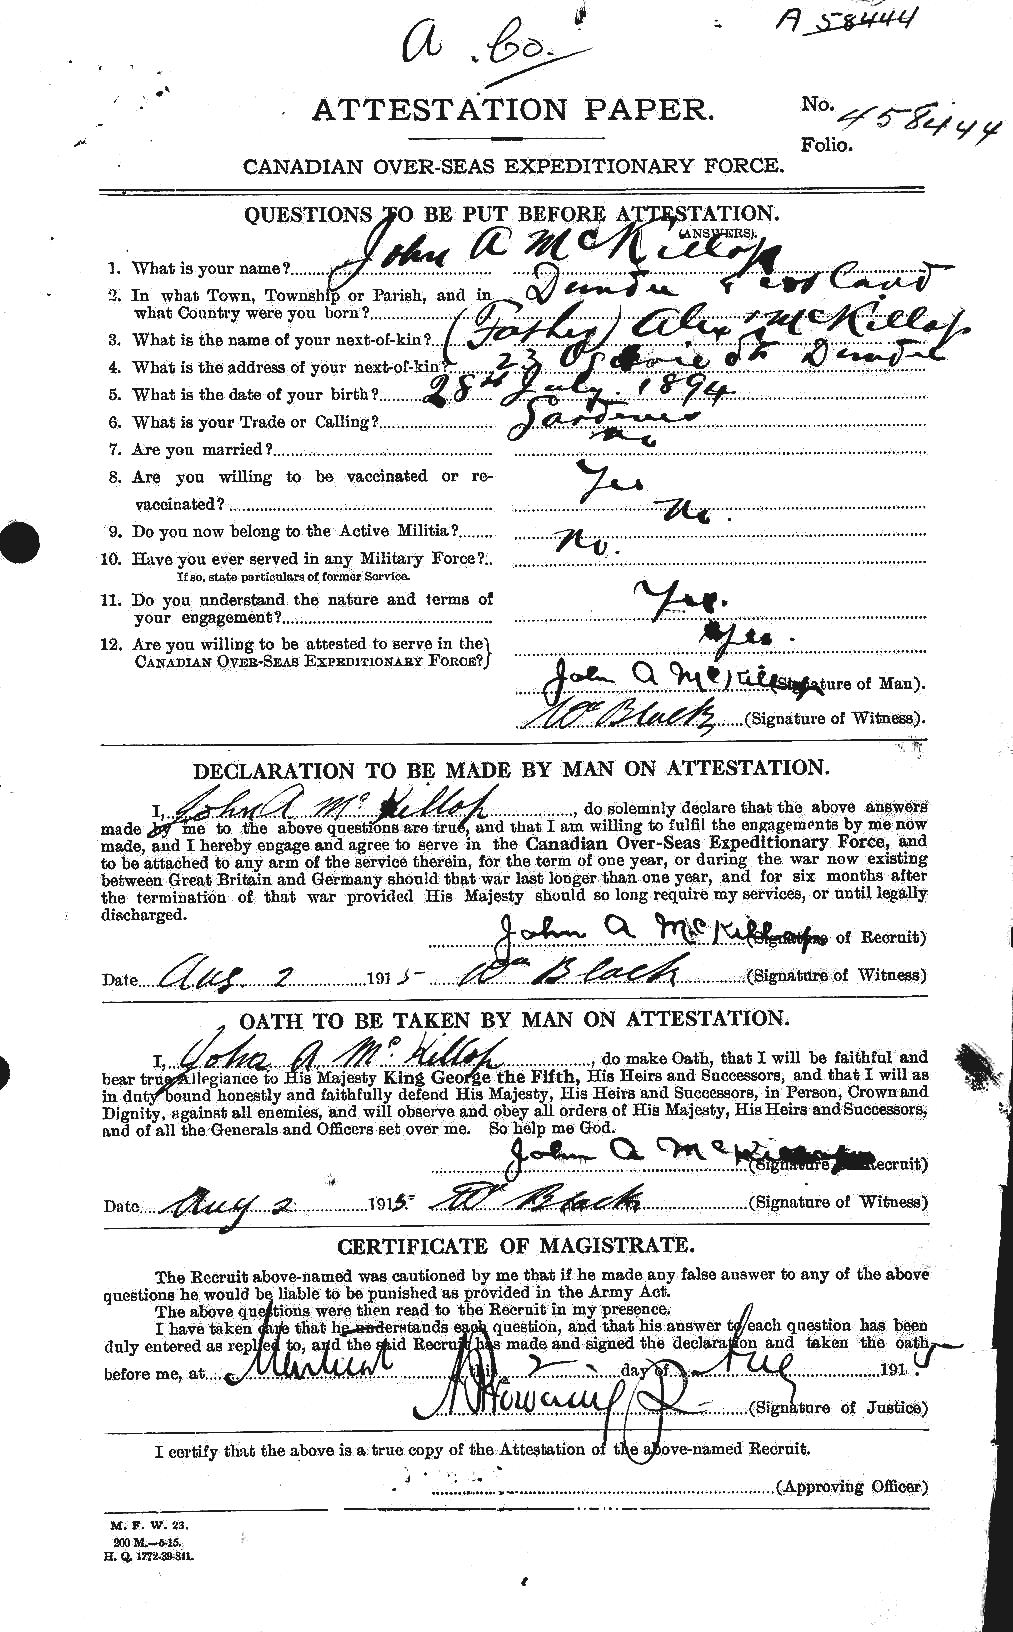 Personnel Records of the First World War - CEF 533827a